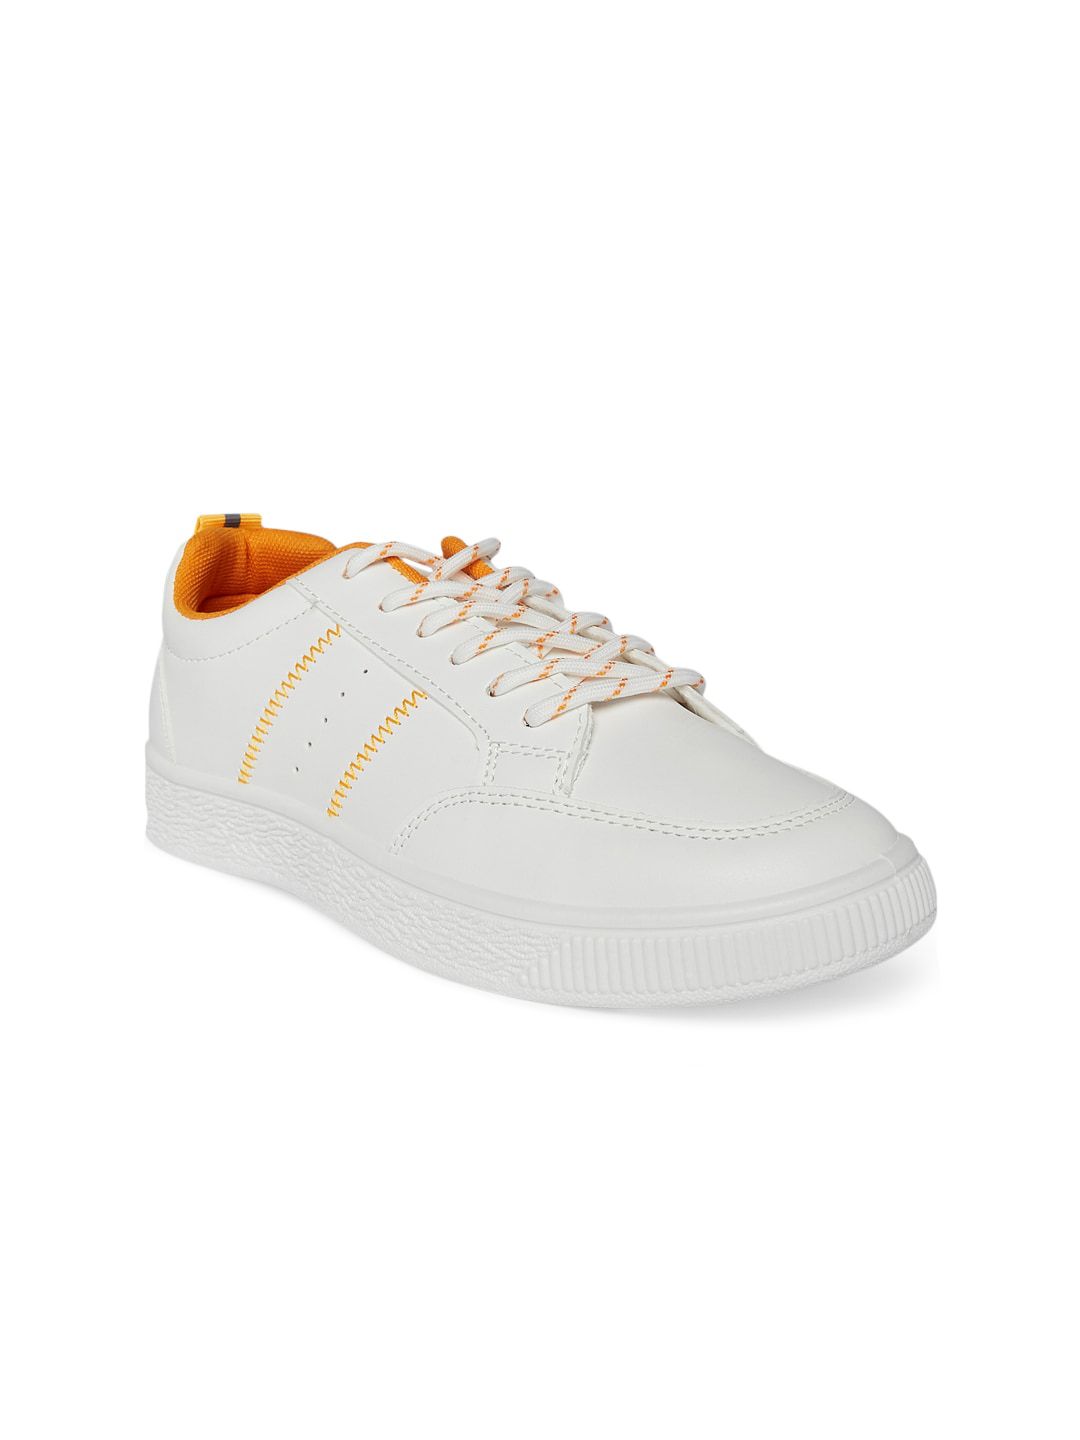 Forever Glam by Pantaloons Women White Solid Sneakers Price in India